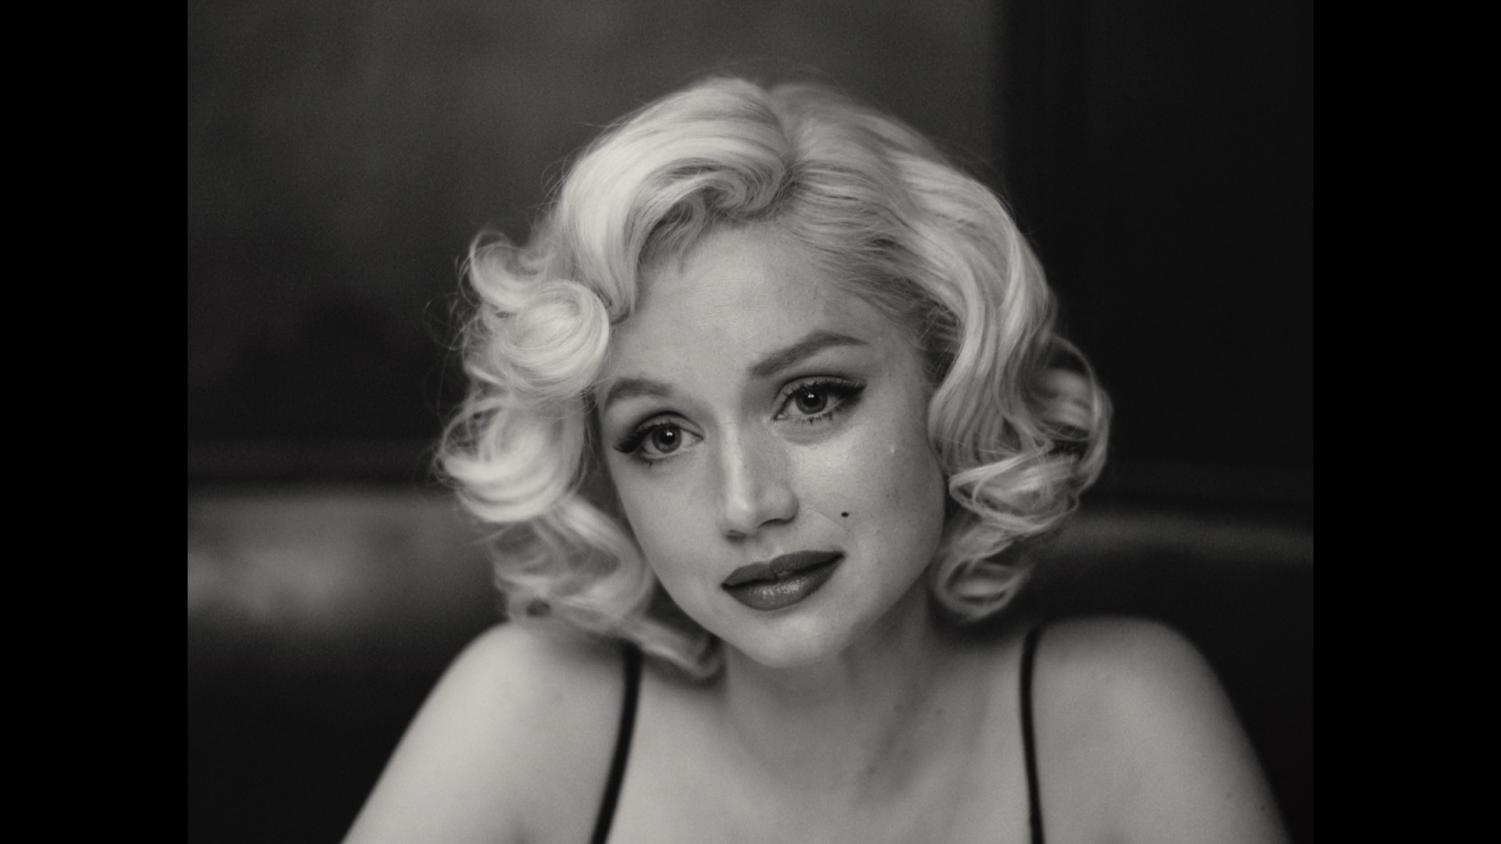 Blonde review: A nightmarish, unsettling reimagining of Marilyn Monroe's  life